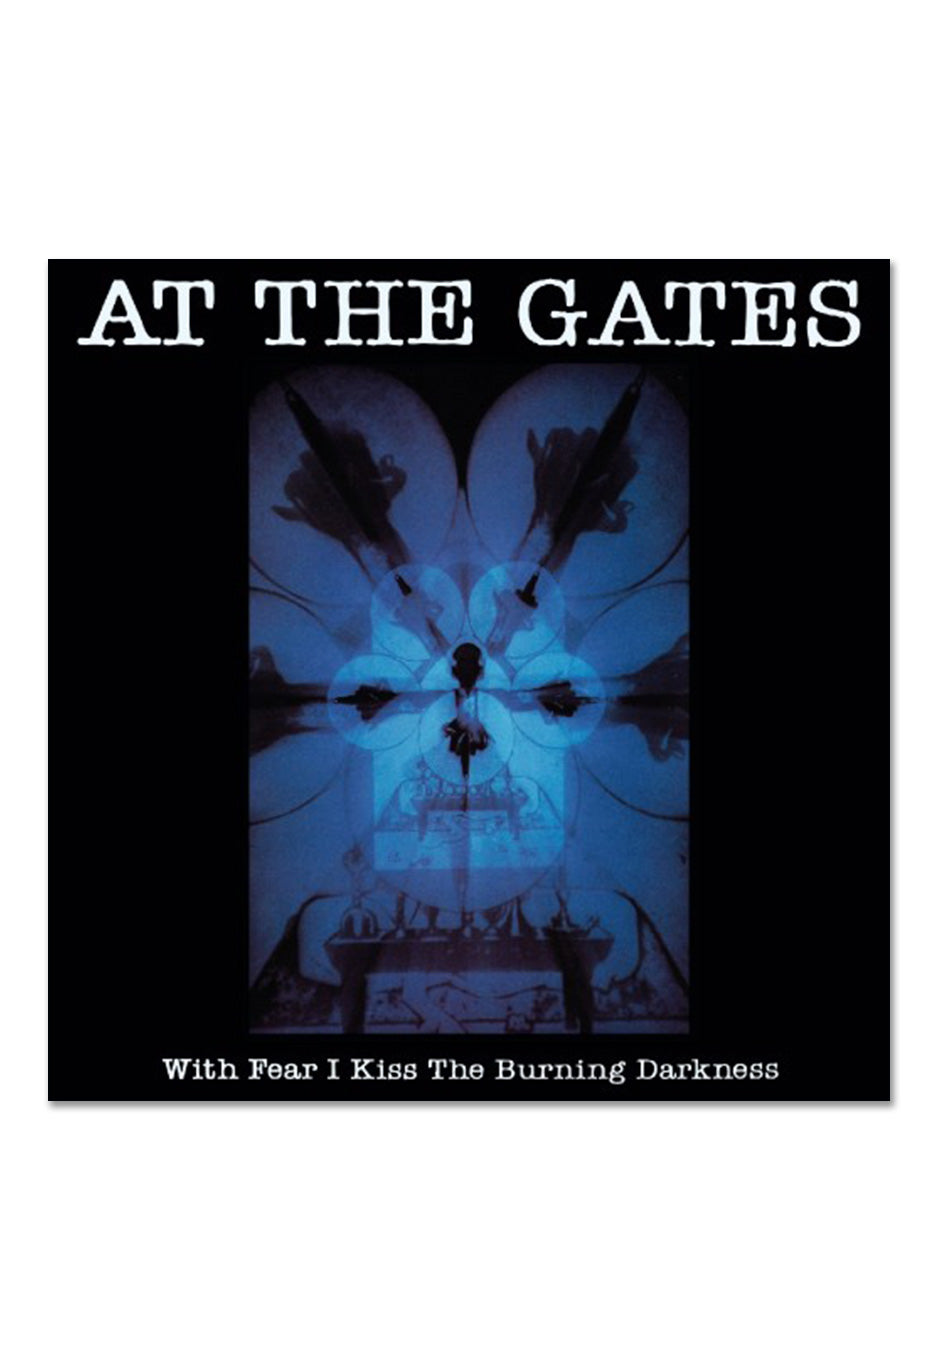 At The Gates - With Fear I Kiss The Burning Darkness (30th Anniversary) Ltd. Blue - Marbled Vinyl